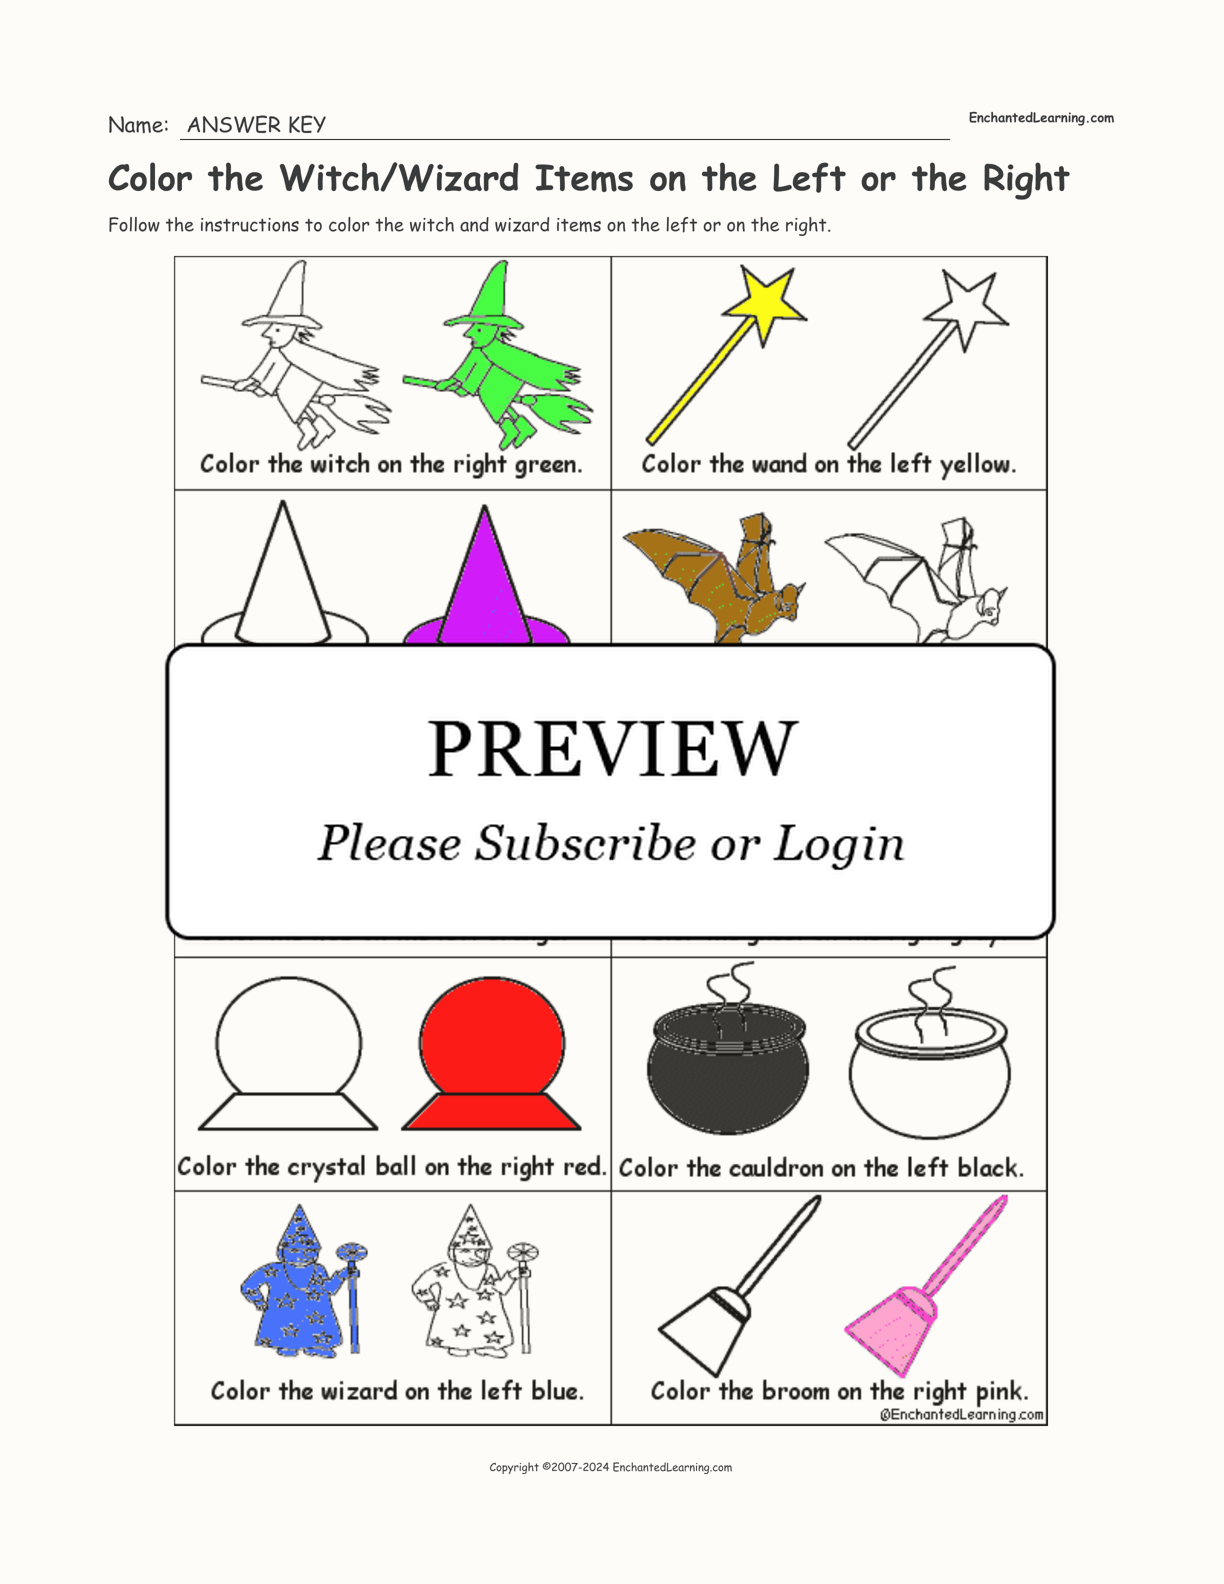 Color the Witch/Wizard Items on the Left or the Right interactive worksheet page 2